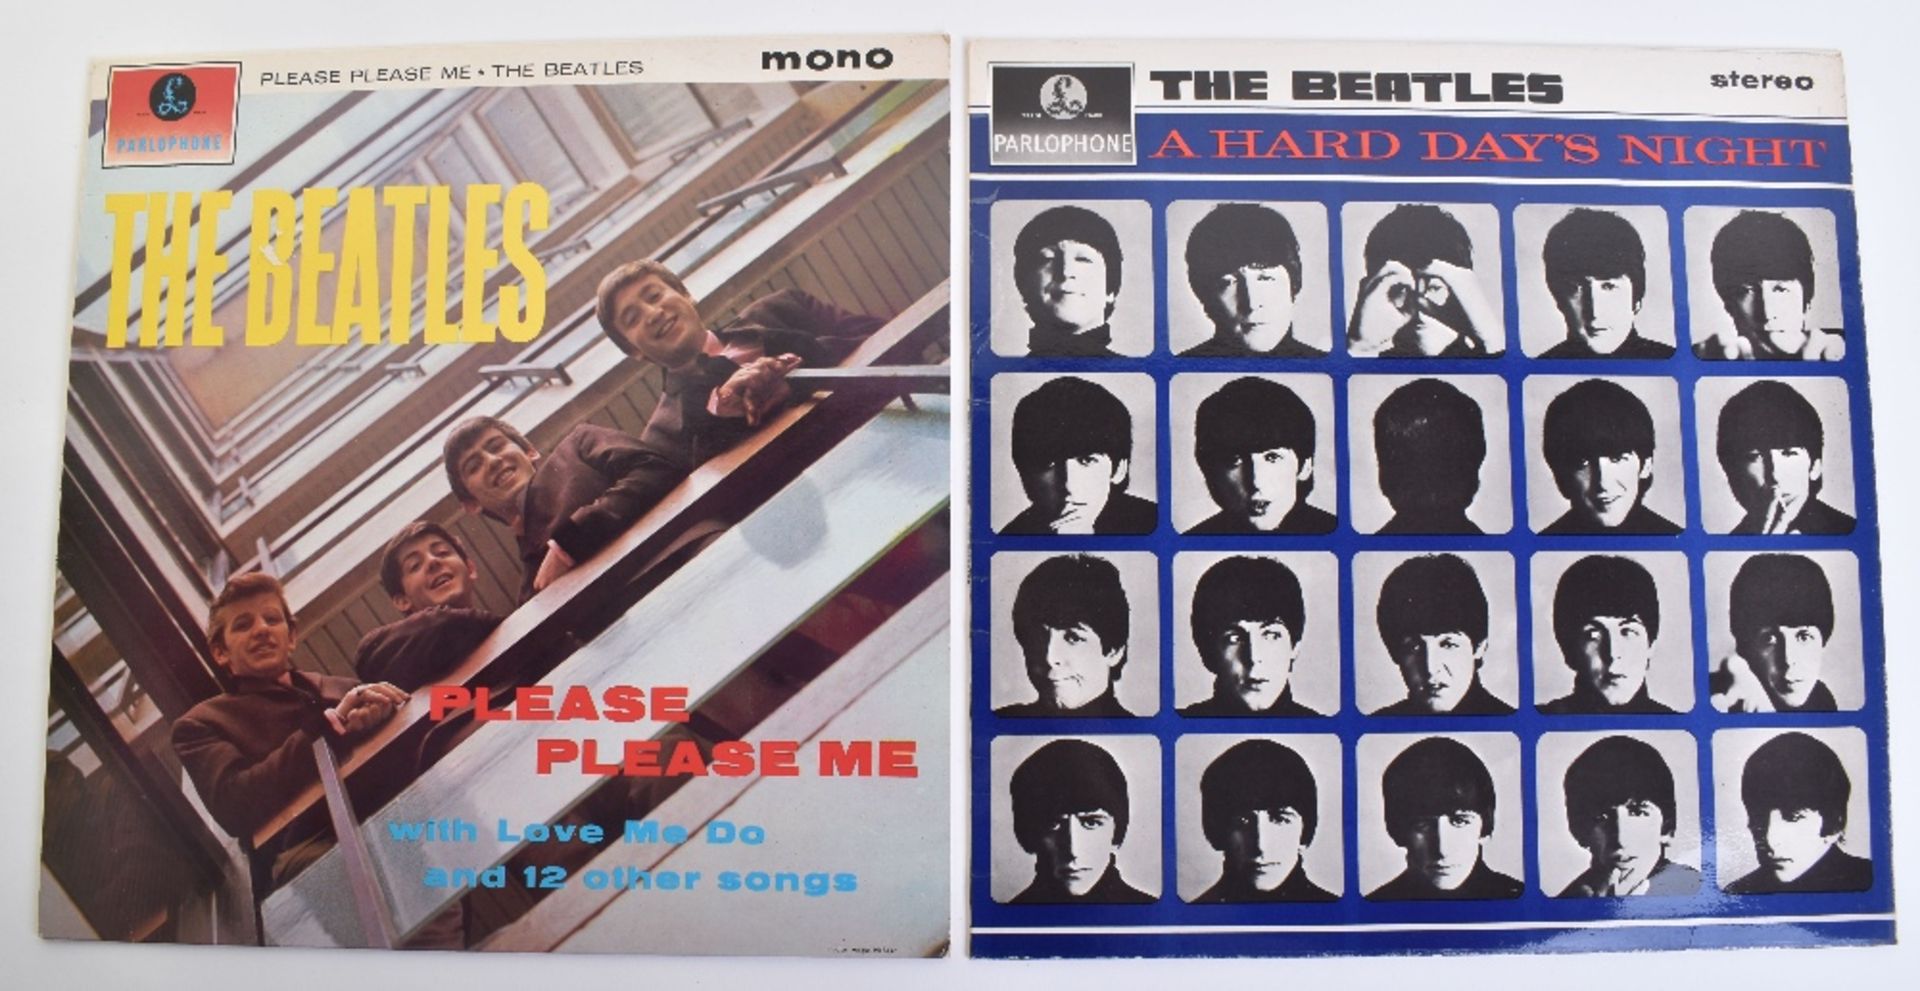 The Beatles Please Please Me - Image 3 of 4